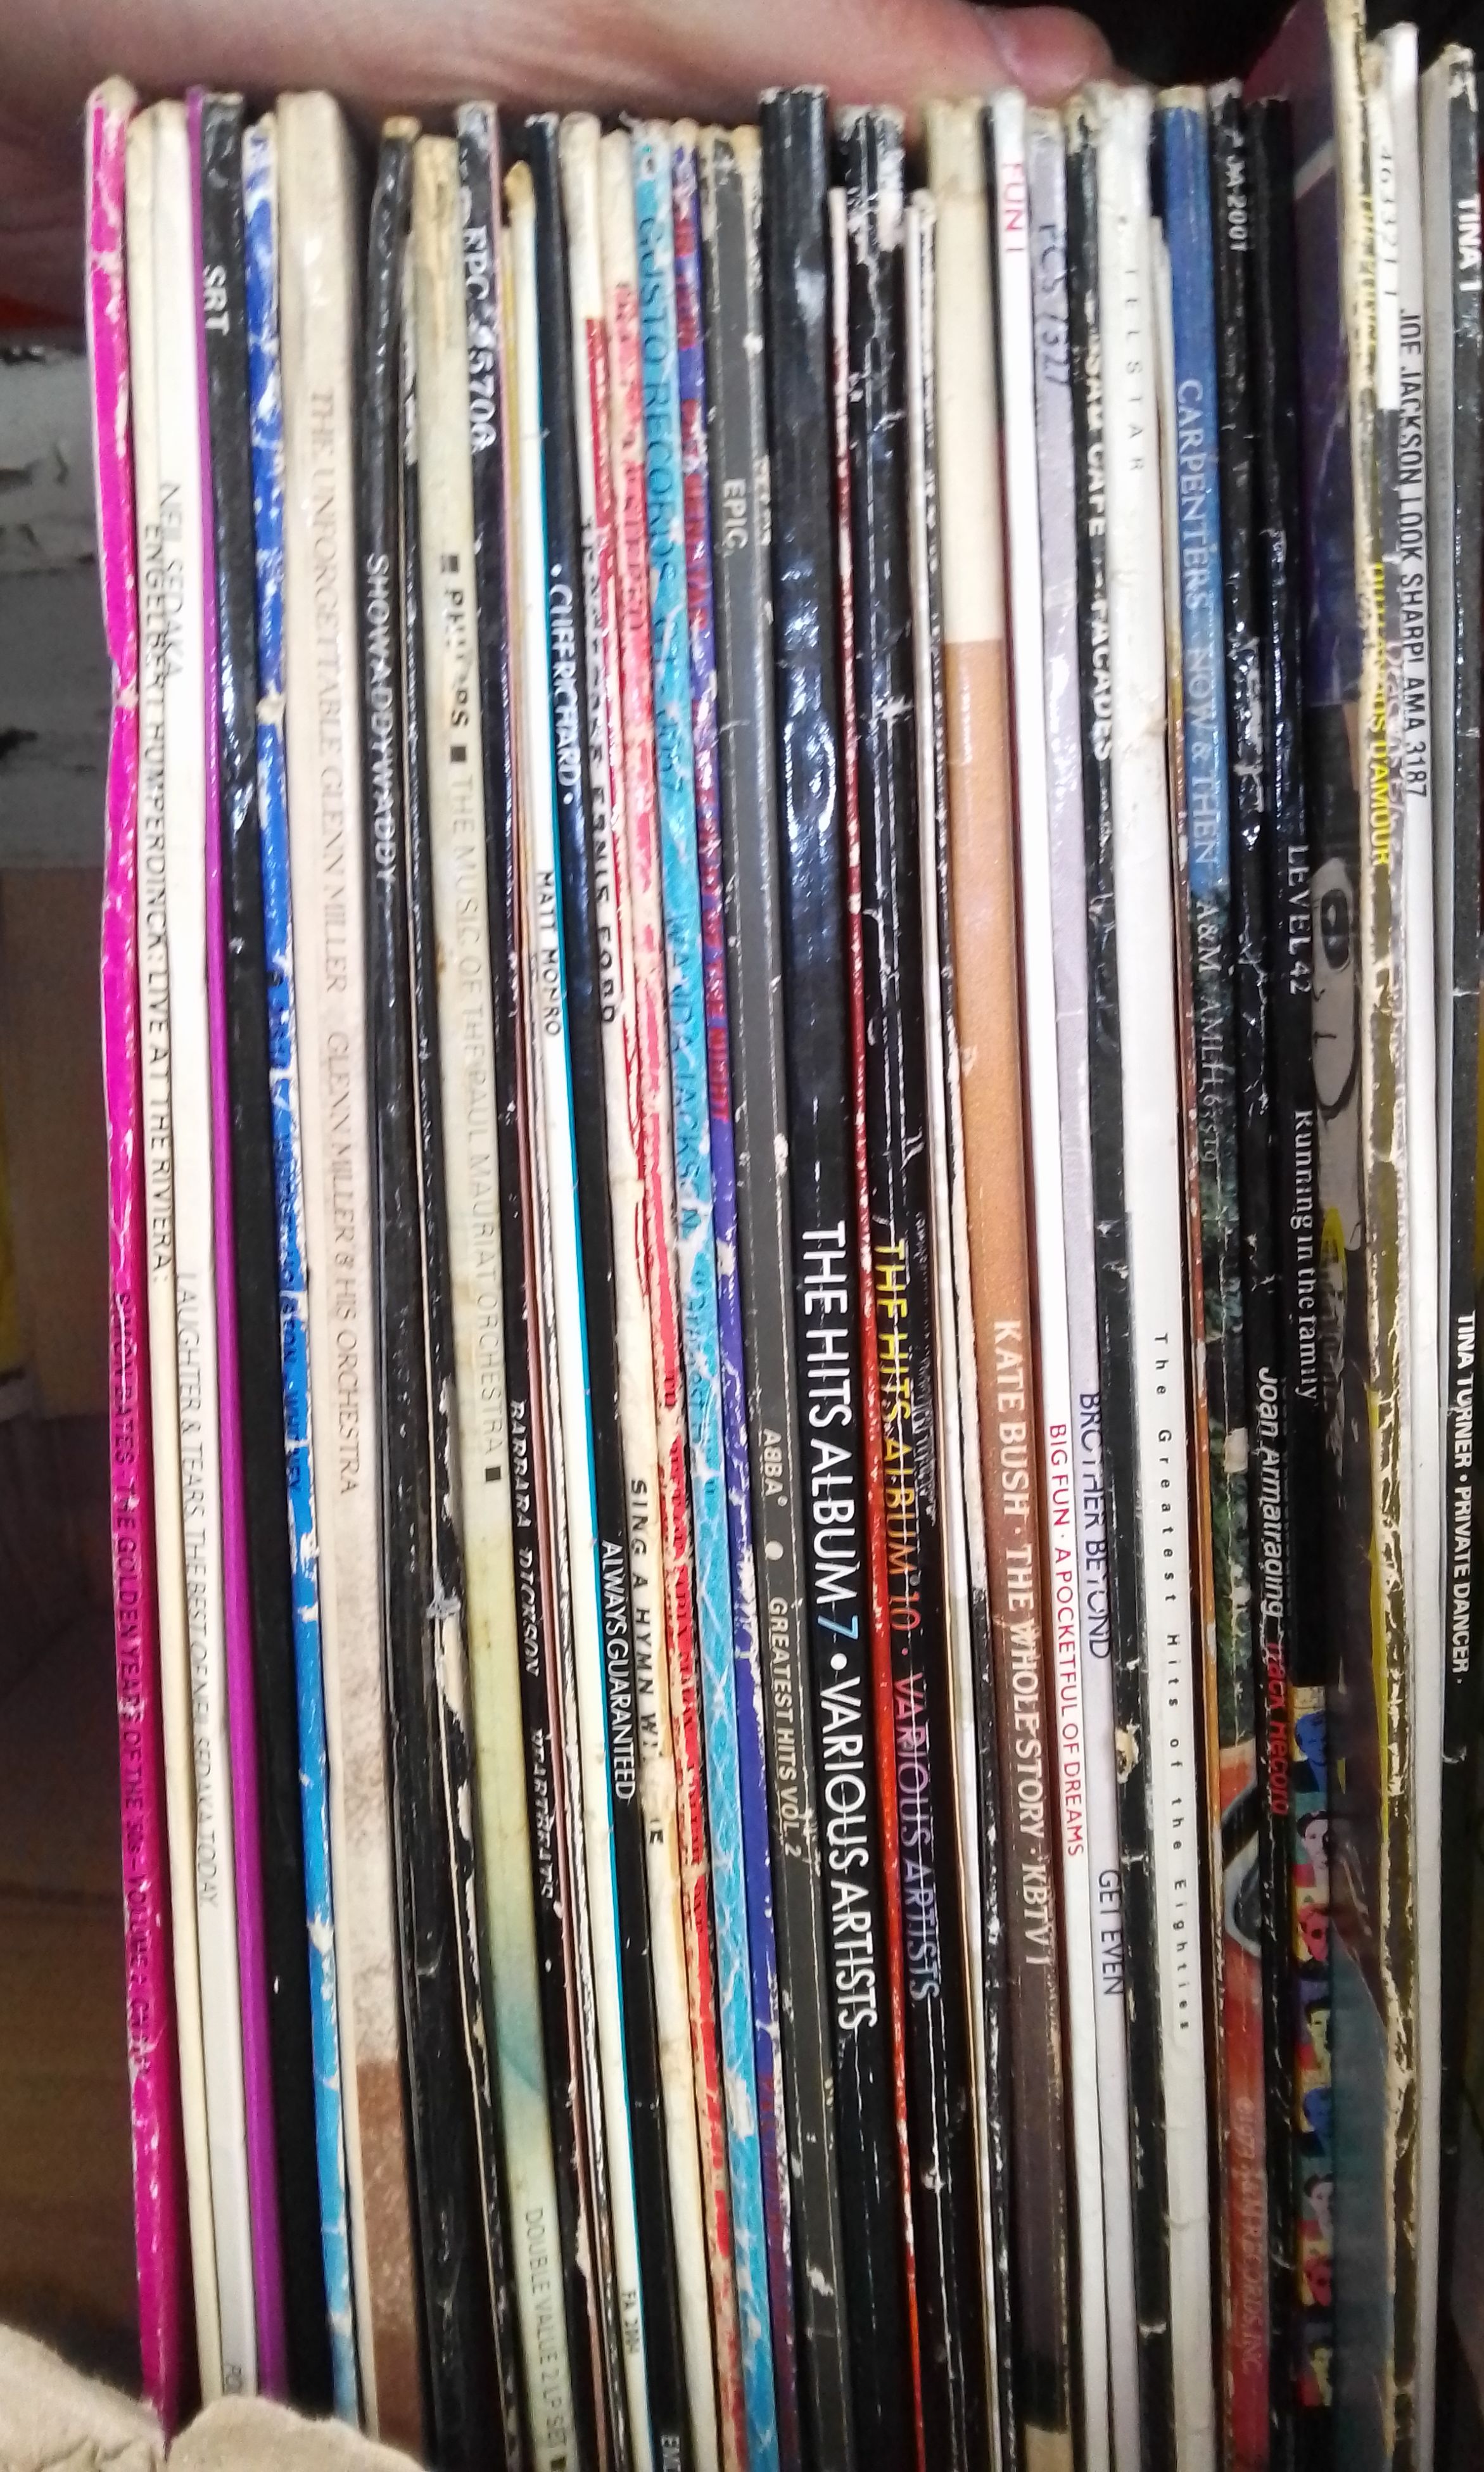 A box of vinyl LP records, rock and pop including Tina Turner, Deacon Blue, The Police, etc.